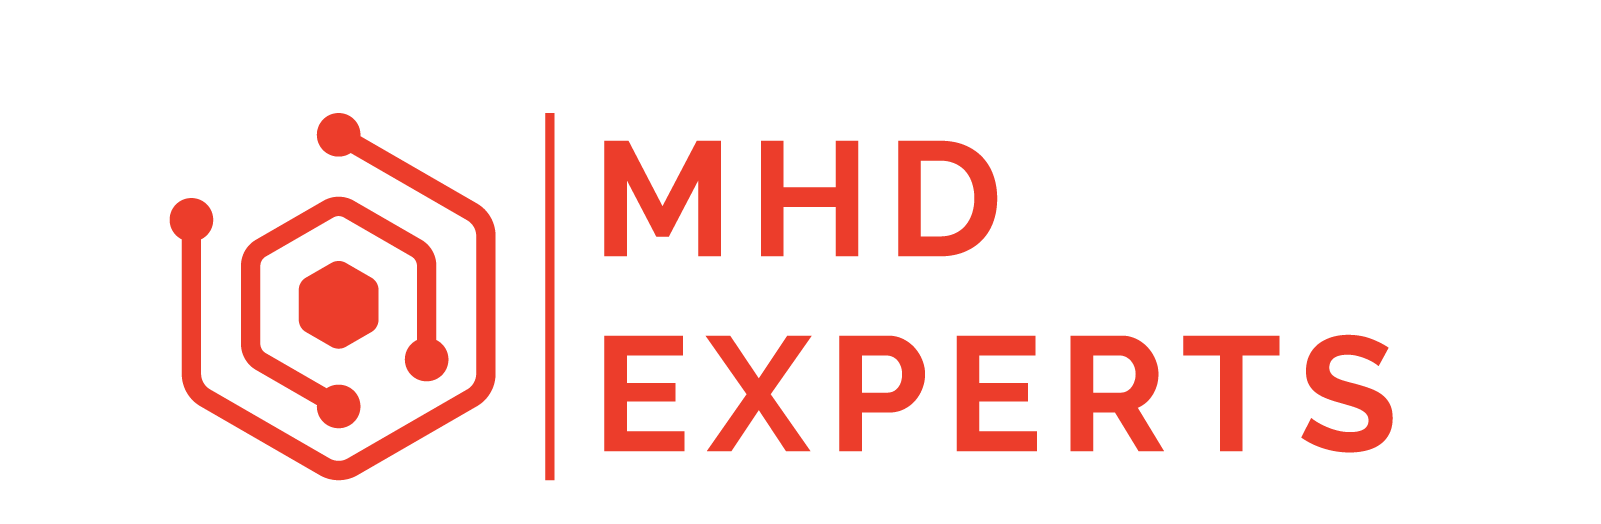 MHD Experts